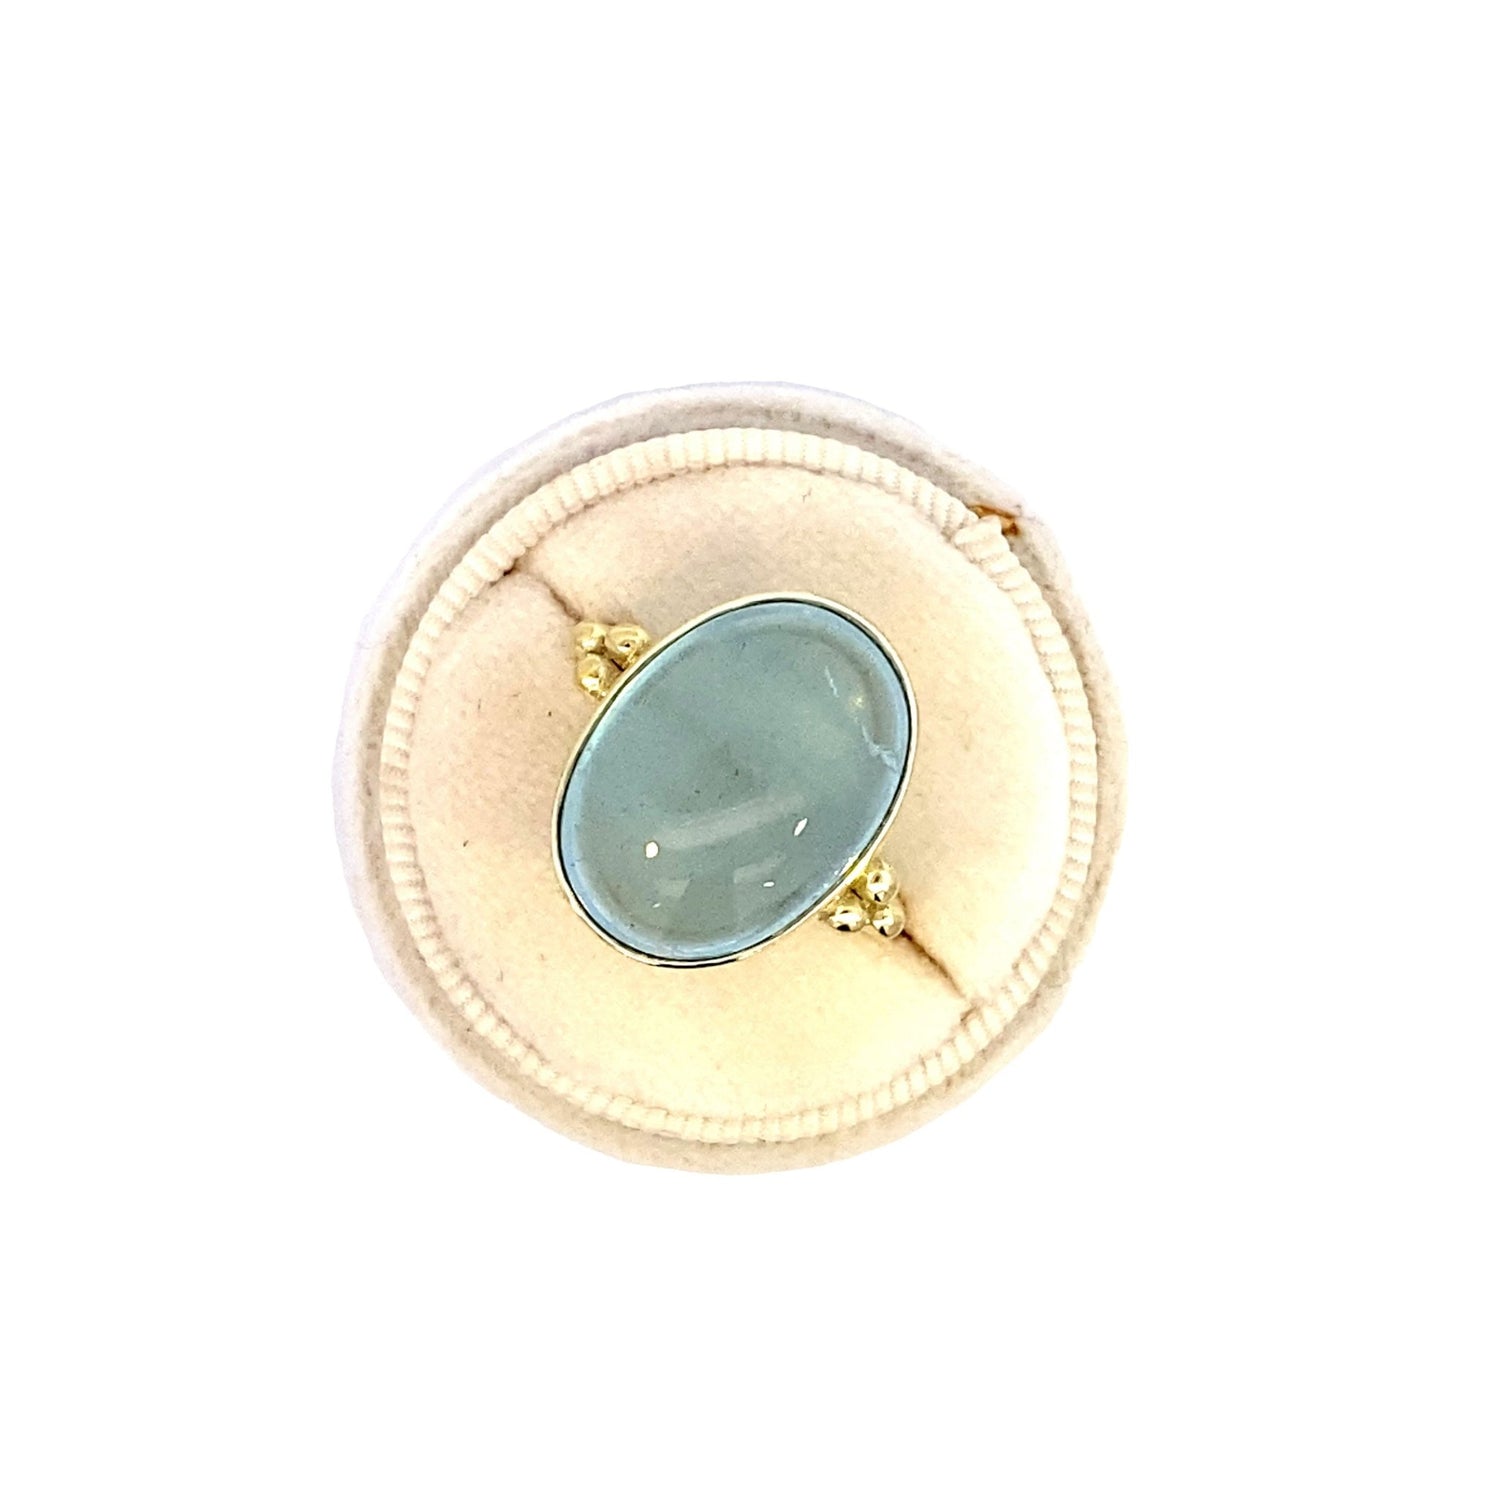 Ring aquamarine large oval in bezel 14kt yellow gold - Gaines Jewelers